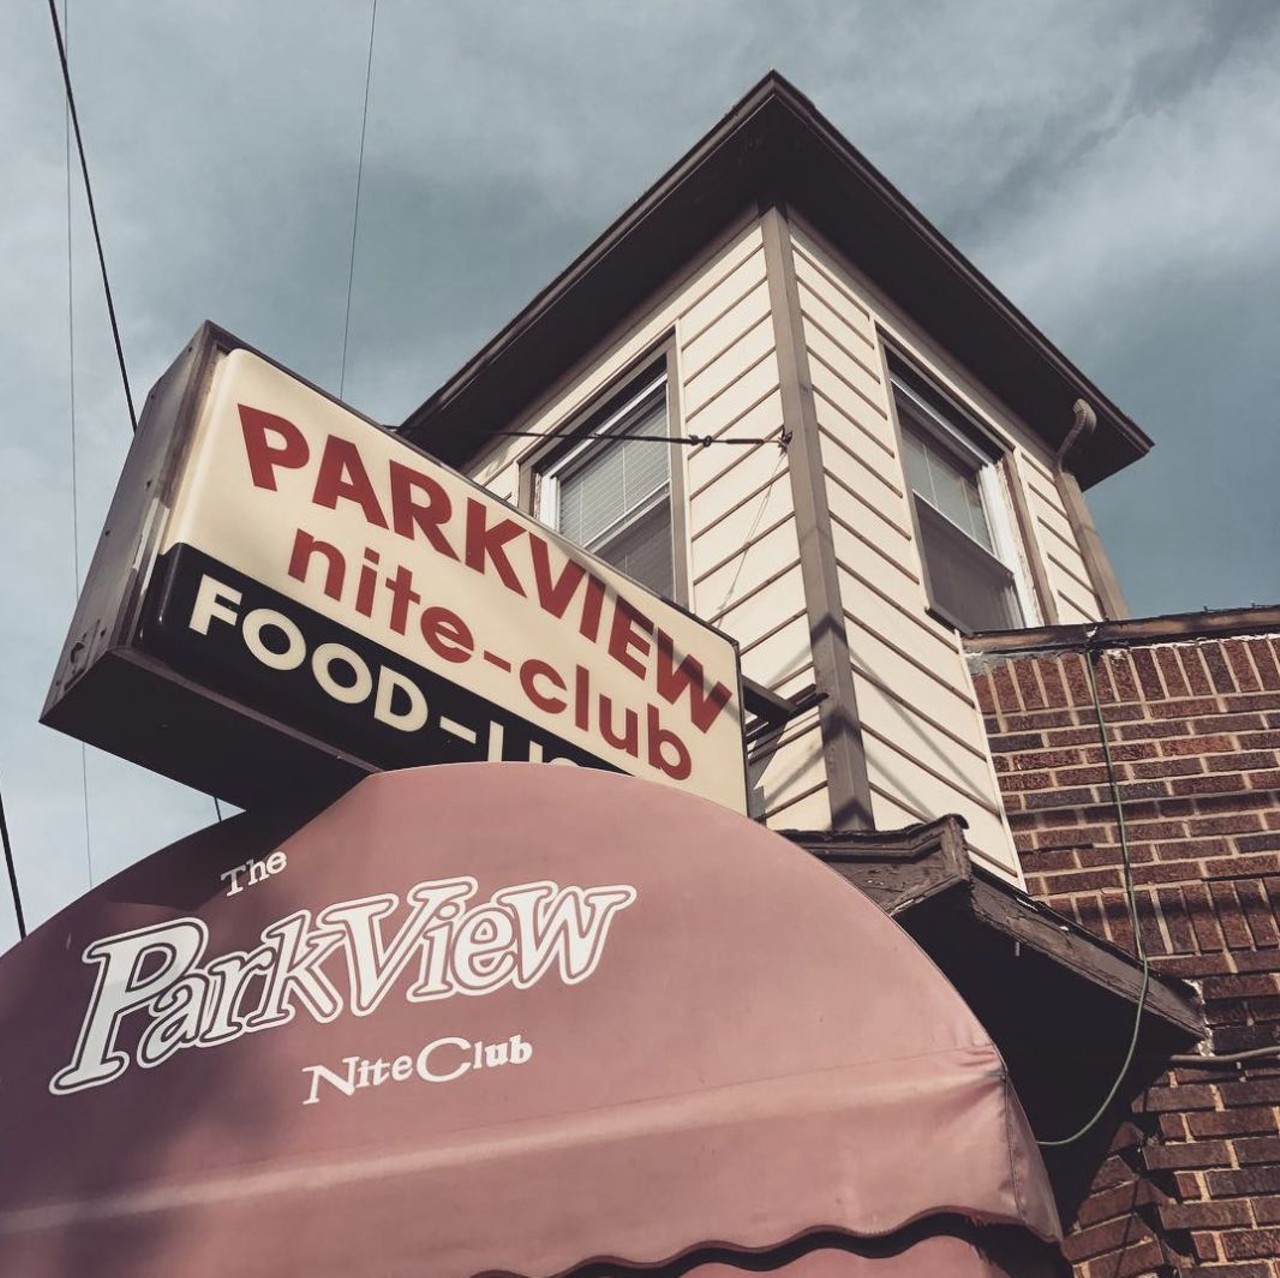  Parkview Nite Club
1261 West 58th St., Cleveland
Recent changes in the kitchen at Parkview Nite Club are just the latest chapter in the quest to offer guests quality fare at neighborly prices. Their current food offerings, run by Chow Chow, feature some great southern items like Nashville-style hot chicken.
Photo via @JMPIsAwesome/Instagram